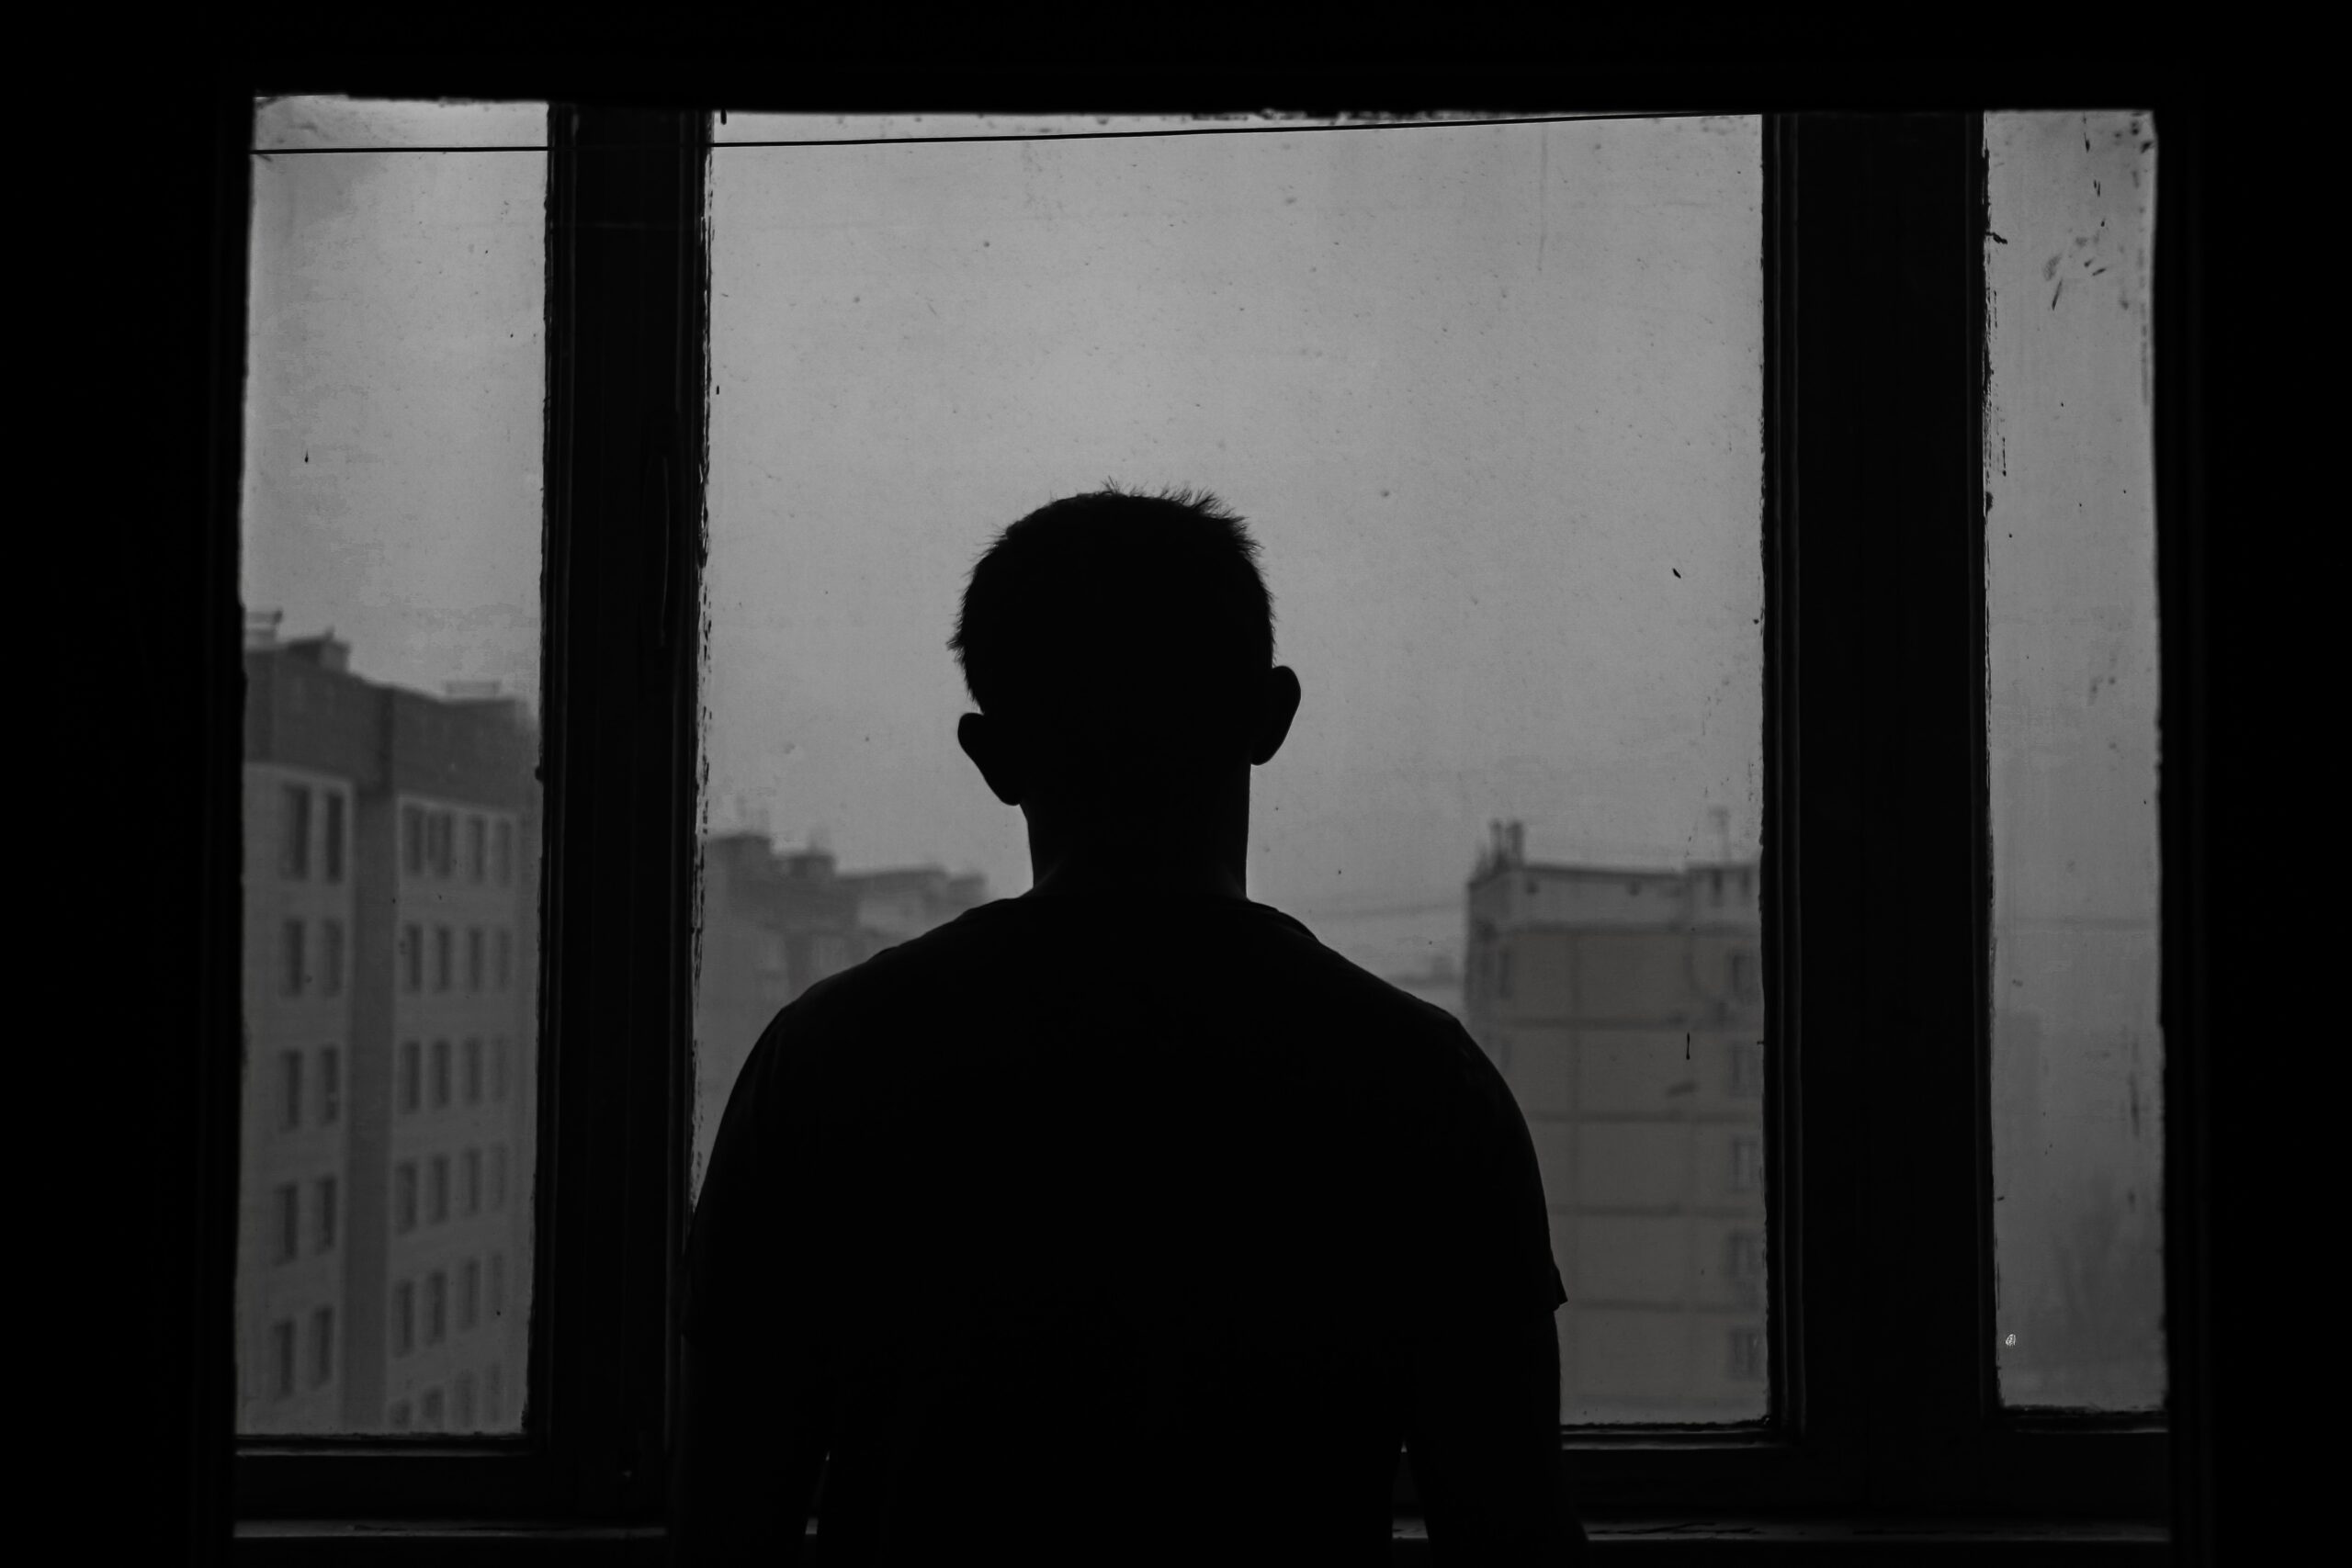 black and white image of a man silhouetted in a window